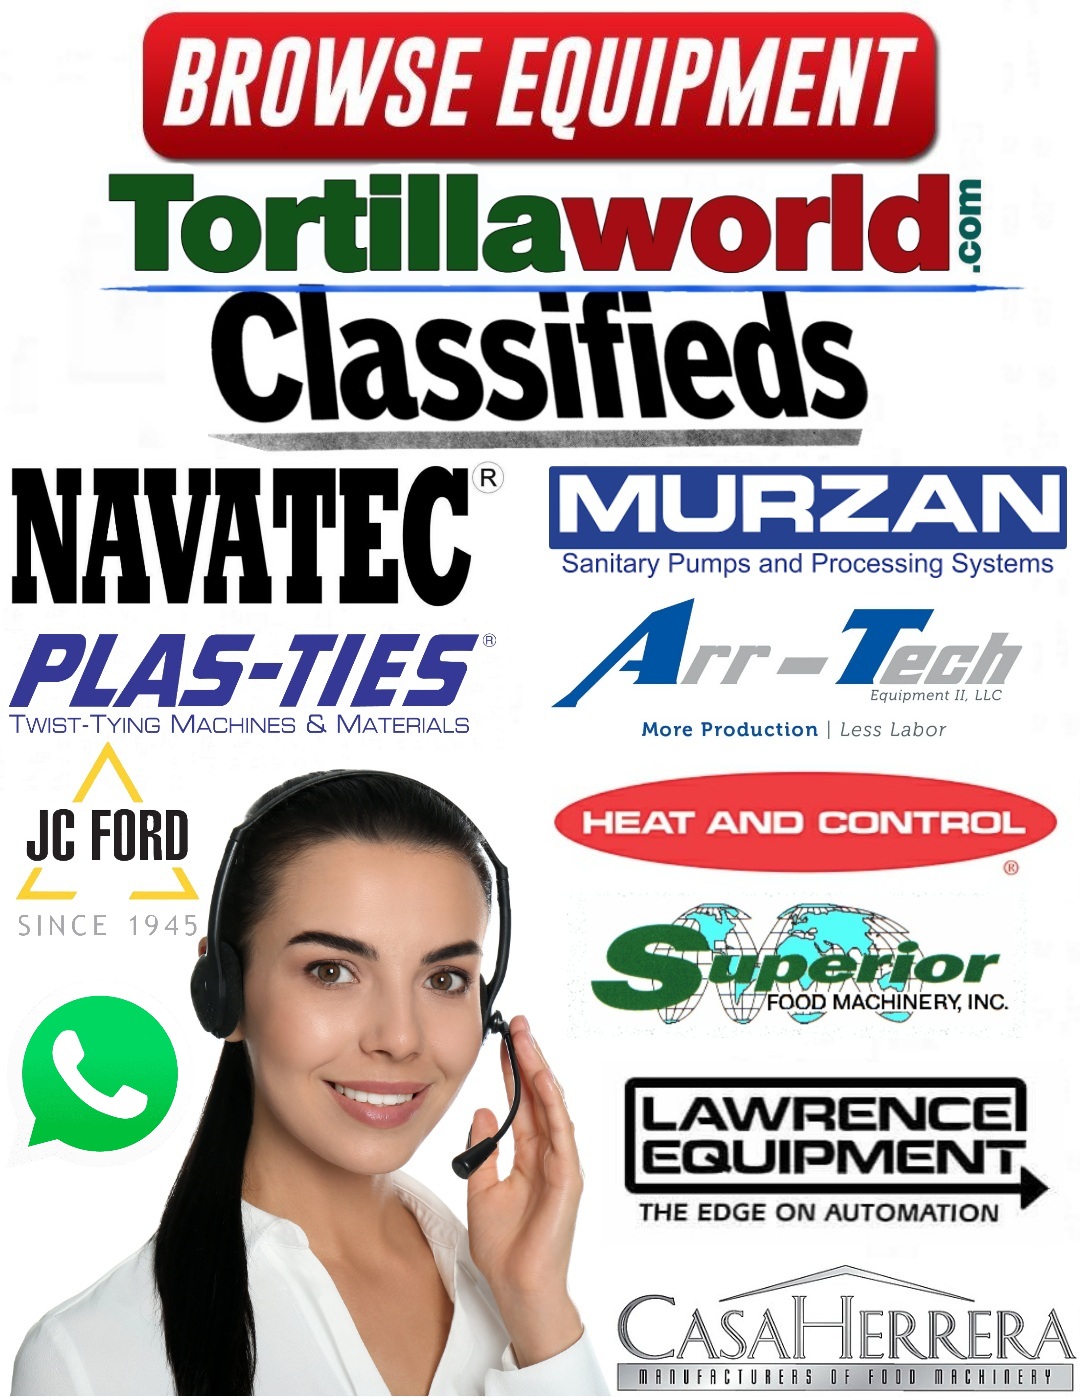 Since 2012 Tortillaworld.com™ has been building a growing reputation in the tortilla, wraps, flat-bread, chapatti & snack Industry of having the world's largest on-line selection of new & used tortilla manufacturing equipment made in the USA and offering Ingredients, lubricants & replacement parts viewed monthly by thousands of tortilla Industry decision makers & professionals worldwide